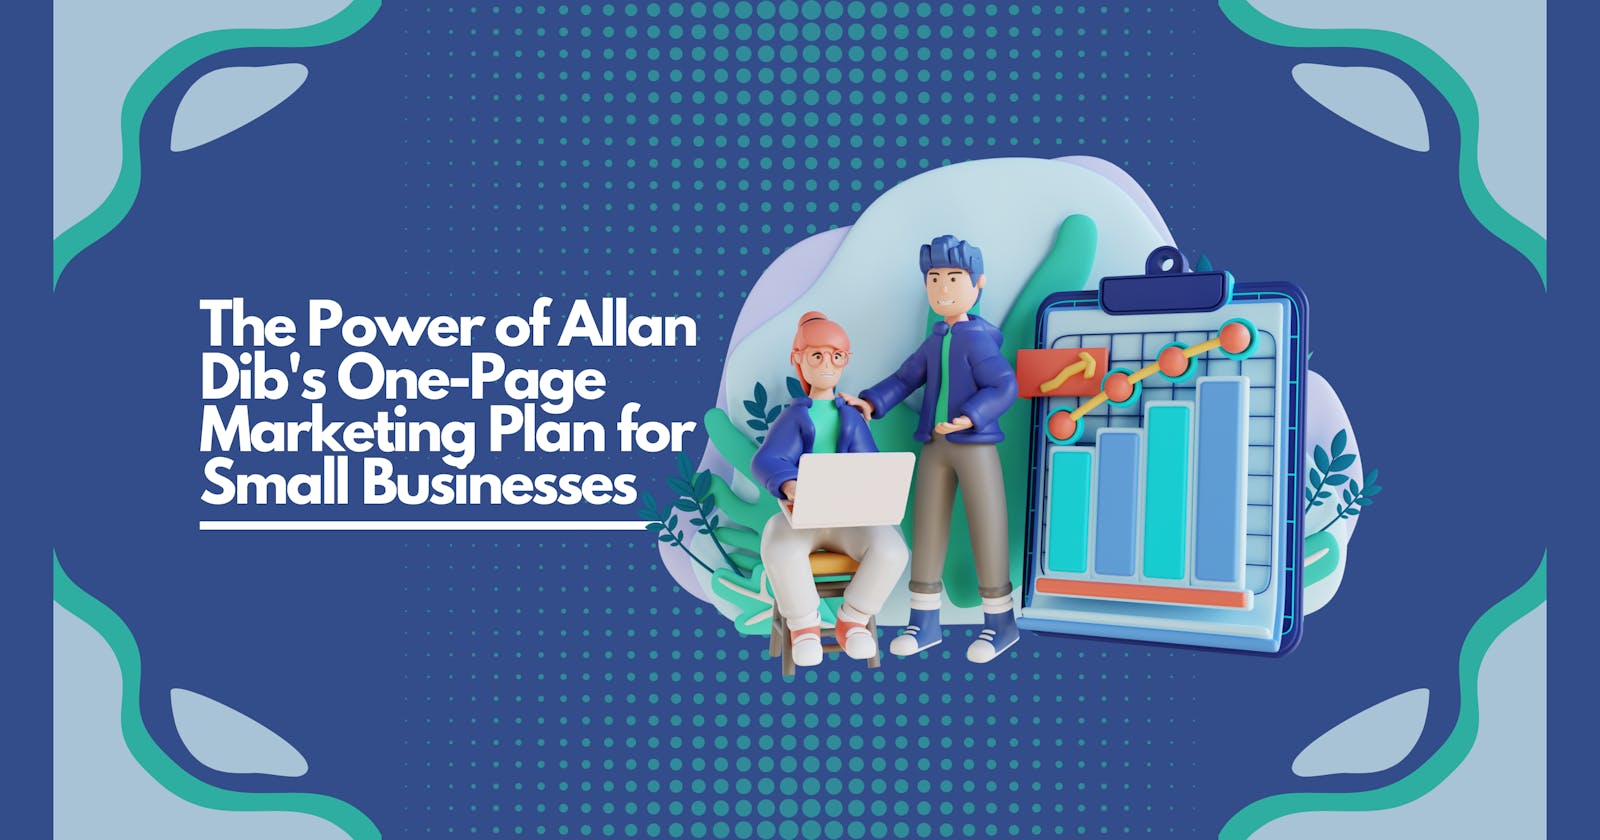 Unleashing Growth: The Power of Allan Dib's One-Page Marketing Plan for Small Businesses